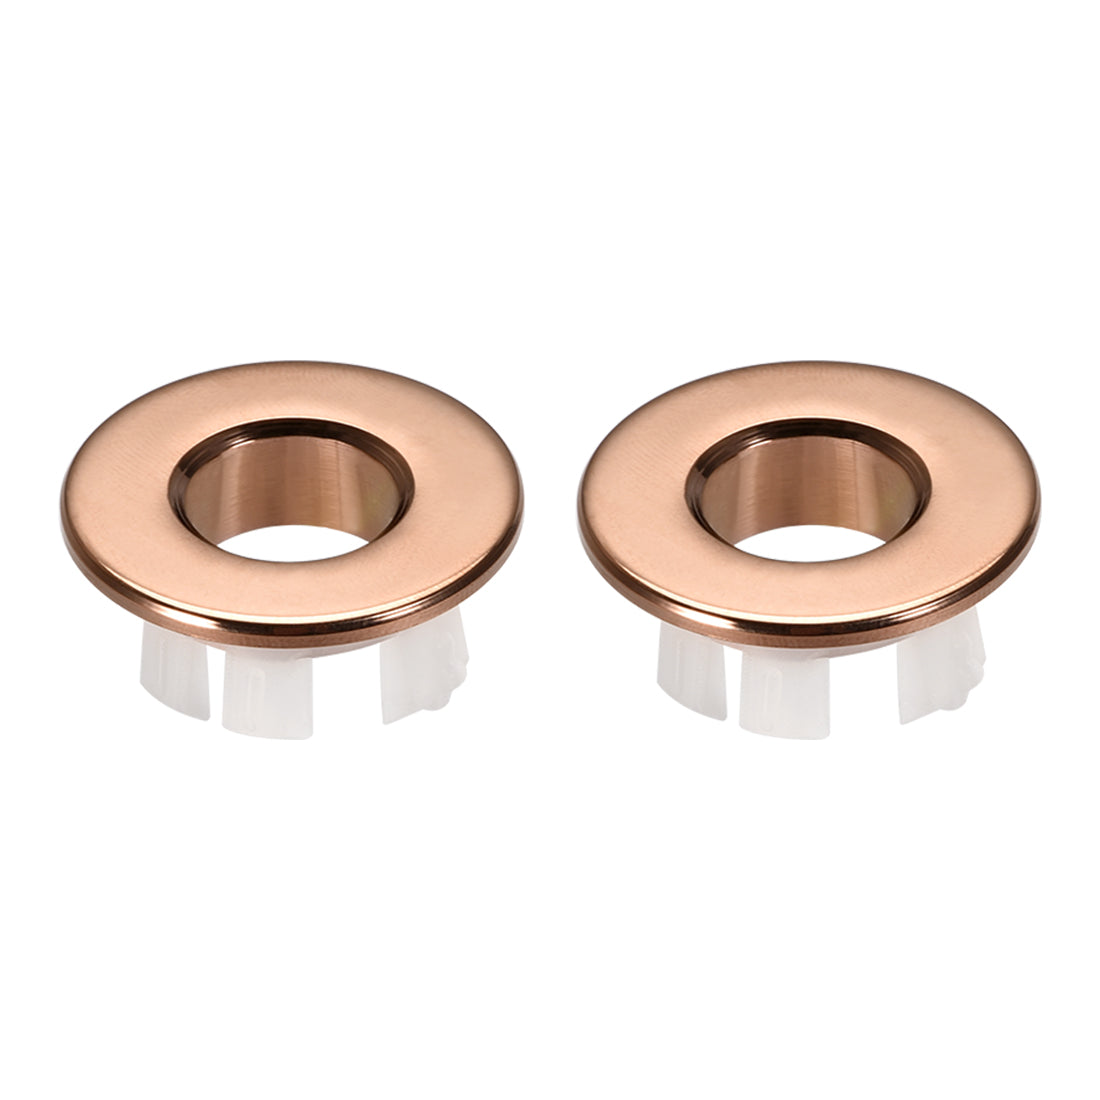 uxcell Uxcell Sink Basin Trim Overflow Cover Copper Insert in Hole Round Caps 2Pcs